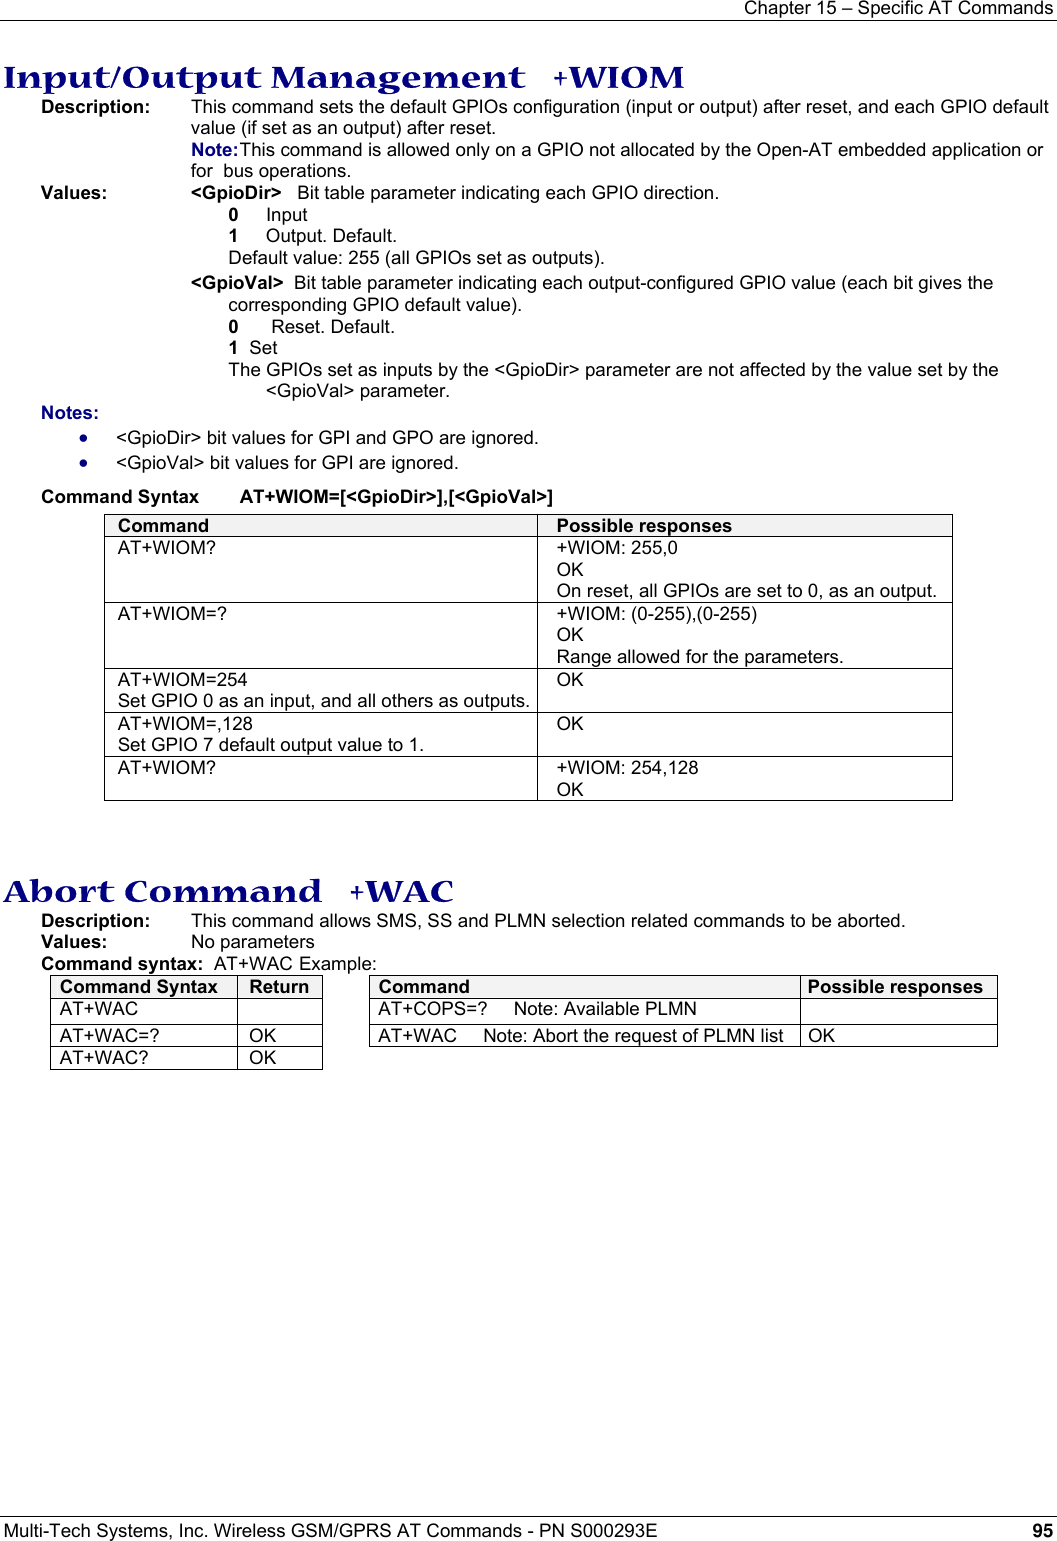 Chapter 15 – Specific AT Commands  Multi-Tech Systems, Inc. Wireless GSM/GPRS AT Commands - PN S000293E 95  Input/Output Management   +WIOM Description:  This command sets the default GPIOs configuration (input or output) after reset, and each GPIO default value (if set as an output) after reset.  Note: This command is allowed only on a GPIO not allocated by the Open-AT embedded application or for  bus operations. Values: &lt;GpioDir&gt;   Bit table parameter indicating each GPIO direction.  0 Input 1  Output. Default. Default value: 255 (all GPIOs set as outputs).  &lt;GpioVal&gt;  Bit table parameter indicating each output-configured GPIO value (each bit gives the corresponding GPIO default value). 0   Reset. Default. 1  Set The GPIOs set as inputs by the &lt;GpioDir&gt; parameter are not affected by the value set by the &lt;GpioVal&gt; parameter. Notes:    • &lt;GpioDir&gt; bit values for GPI and GPO are ignored.  • &lt;GpioVal&gt; bit values for GPI are ignored. Command Syntax    AT+WIOM=[&lt;GpioDir&gt;],[&lt;GpioVal&gt;] Command  Possible responses AT+WIOM? +WIOM: 255,0 OK On reset, all GPIOs are set to 0, as an output. AT+WIOM=? +WIOM: (0-255),(0-255) OK Range allowed for the parameters. AT+WIOM=254 Set GPIO 0 as an input, and all others as outputs.OK AT+WIOM=,128 Set GPIO 7 default output value to 1. OK AT+WIOM? +WIOM: 254,128 OK   Abort Command   +WAC Description:  This command allows SMS, SS and PLMN selection related commands to be aborted. Values:  No parameters Command syntax:  AT+WAC Example: Command Syntax  Return   Command  Possible responses AT+WAC      AT+COPS=?     Note: Available PLMN   AT+WAC=?  OK    AT+WAC     Note: Abort the request of PLMN list  OK AT+WAC? OK    